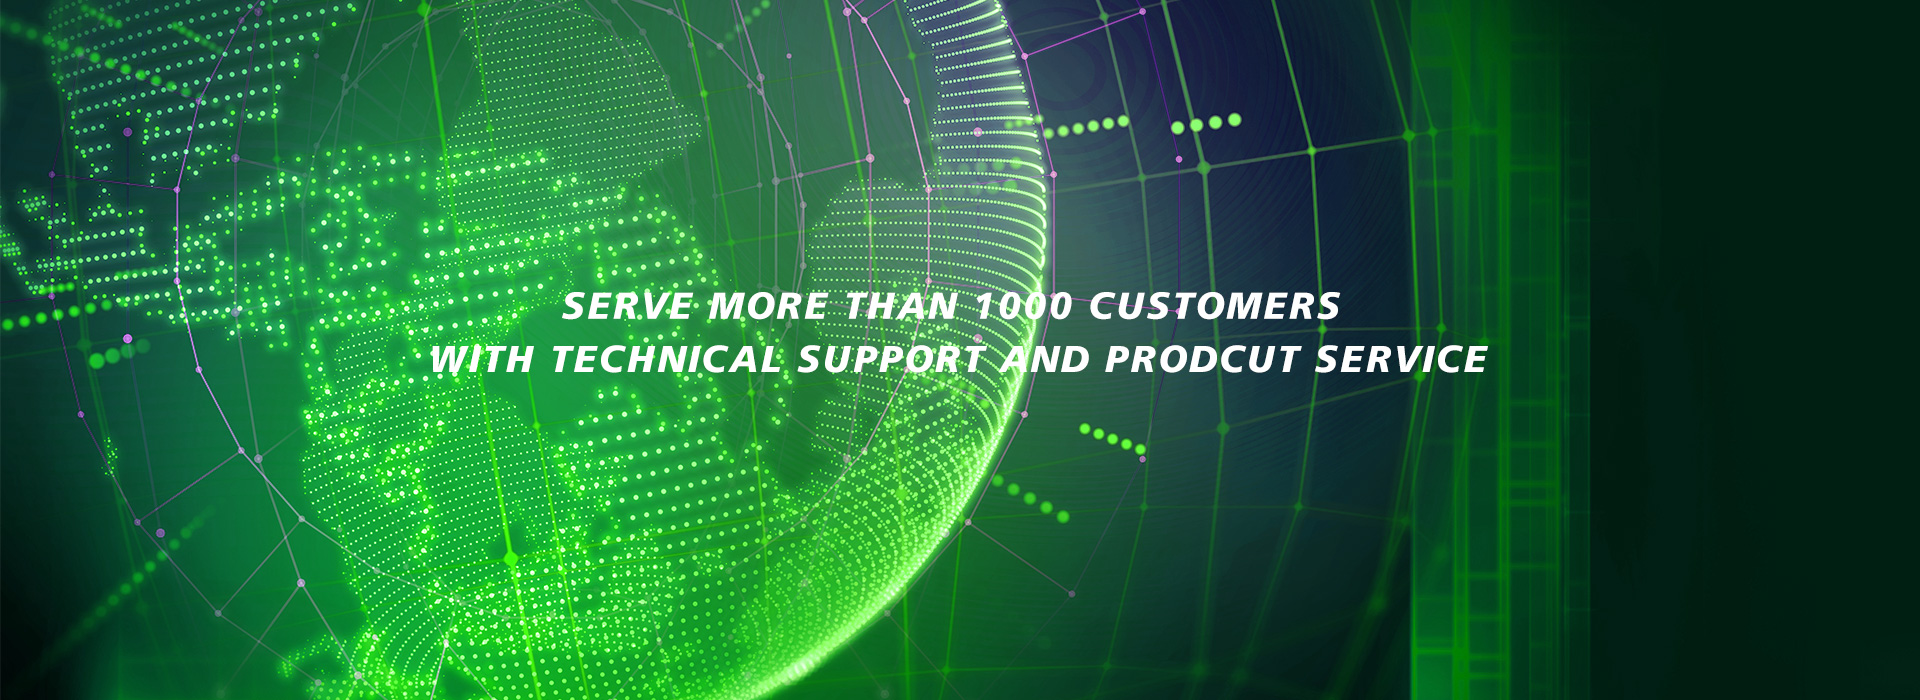 SERVE MORE THAN 1000 CUSTOMERS WITH TECHNICAL SUPPORT AND PRODCUT SERVICE